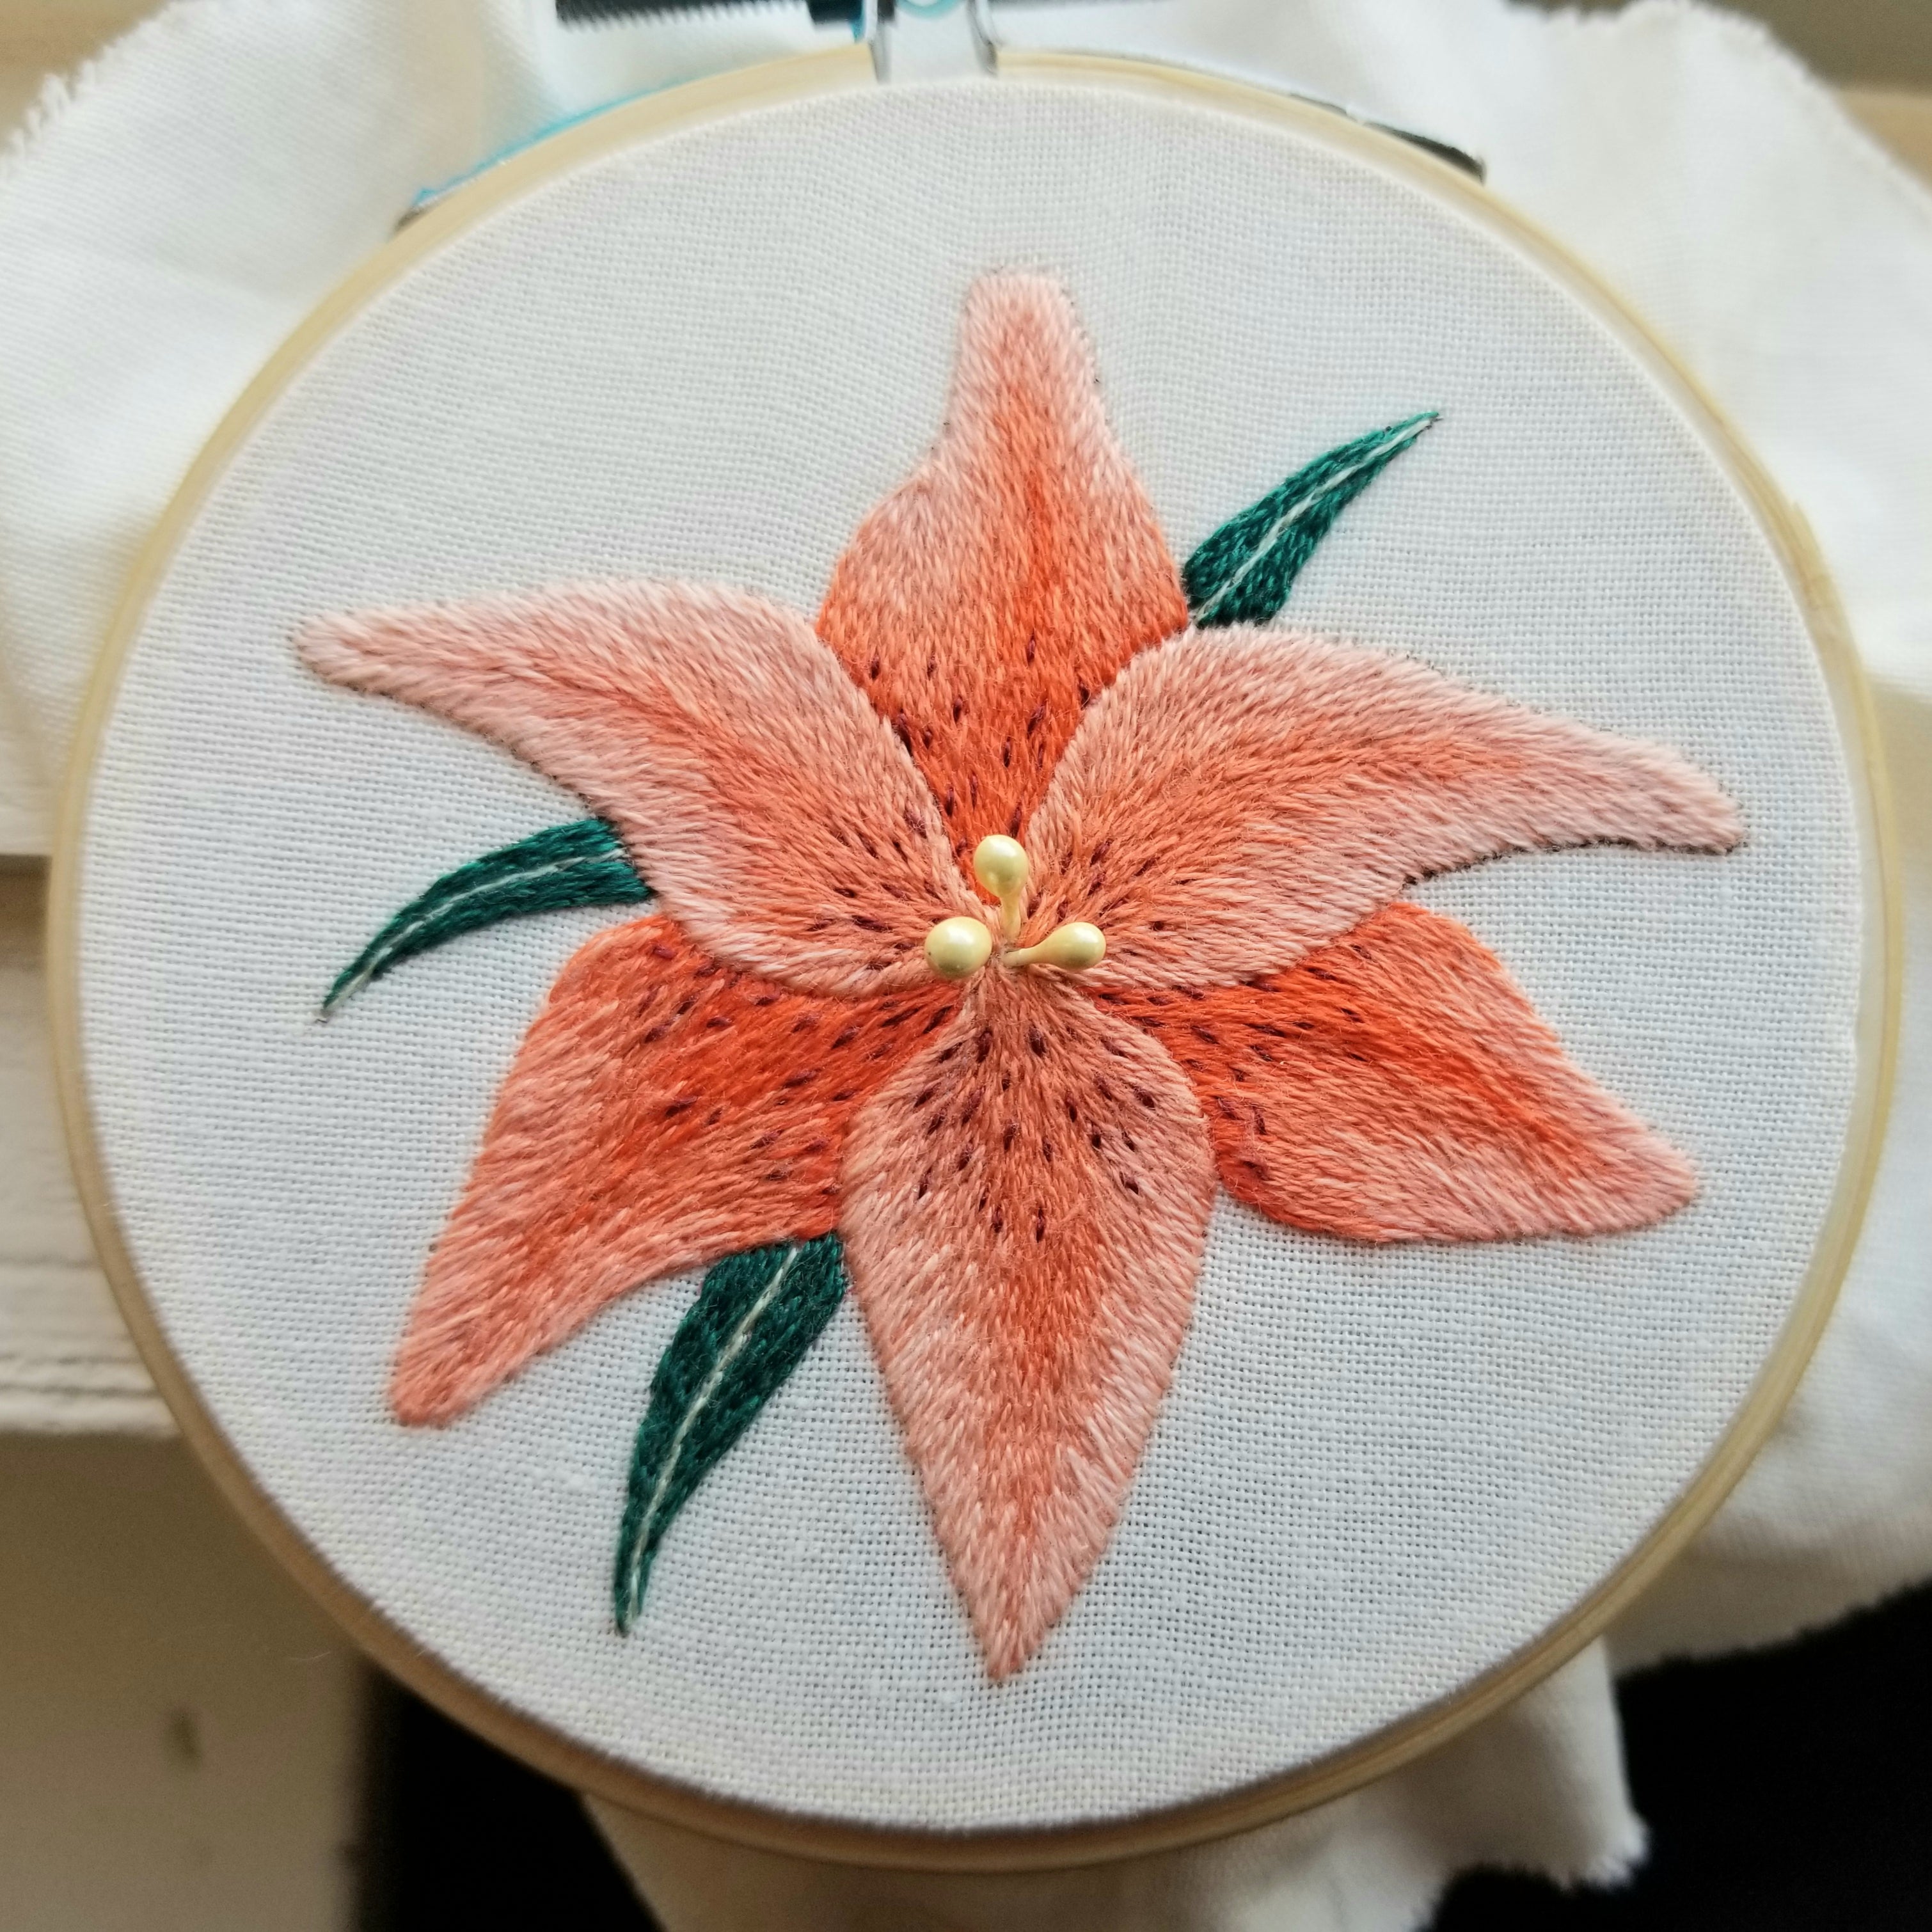 Flower Easter Lily Embroidery Design to do by Hand with Lovely Silk Threads  - Vintage Crafts and More